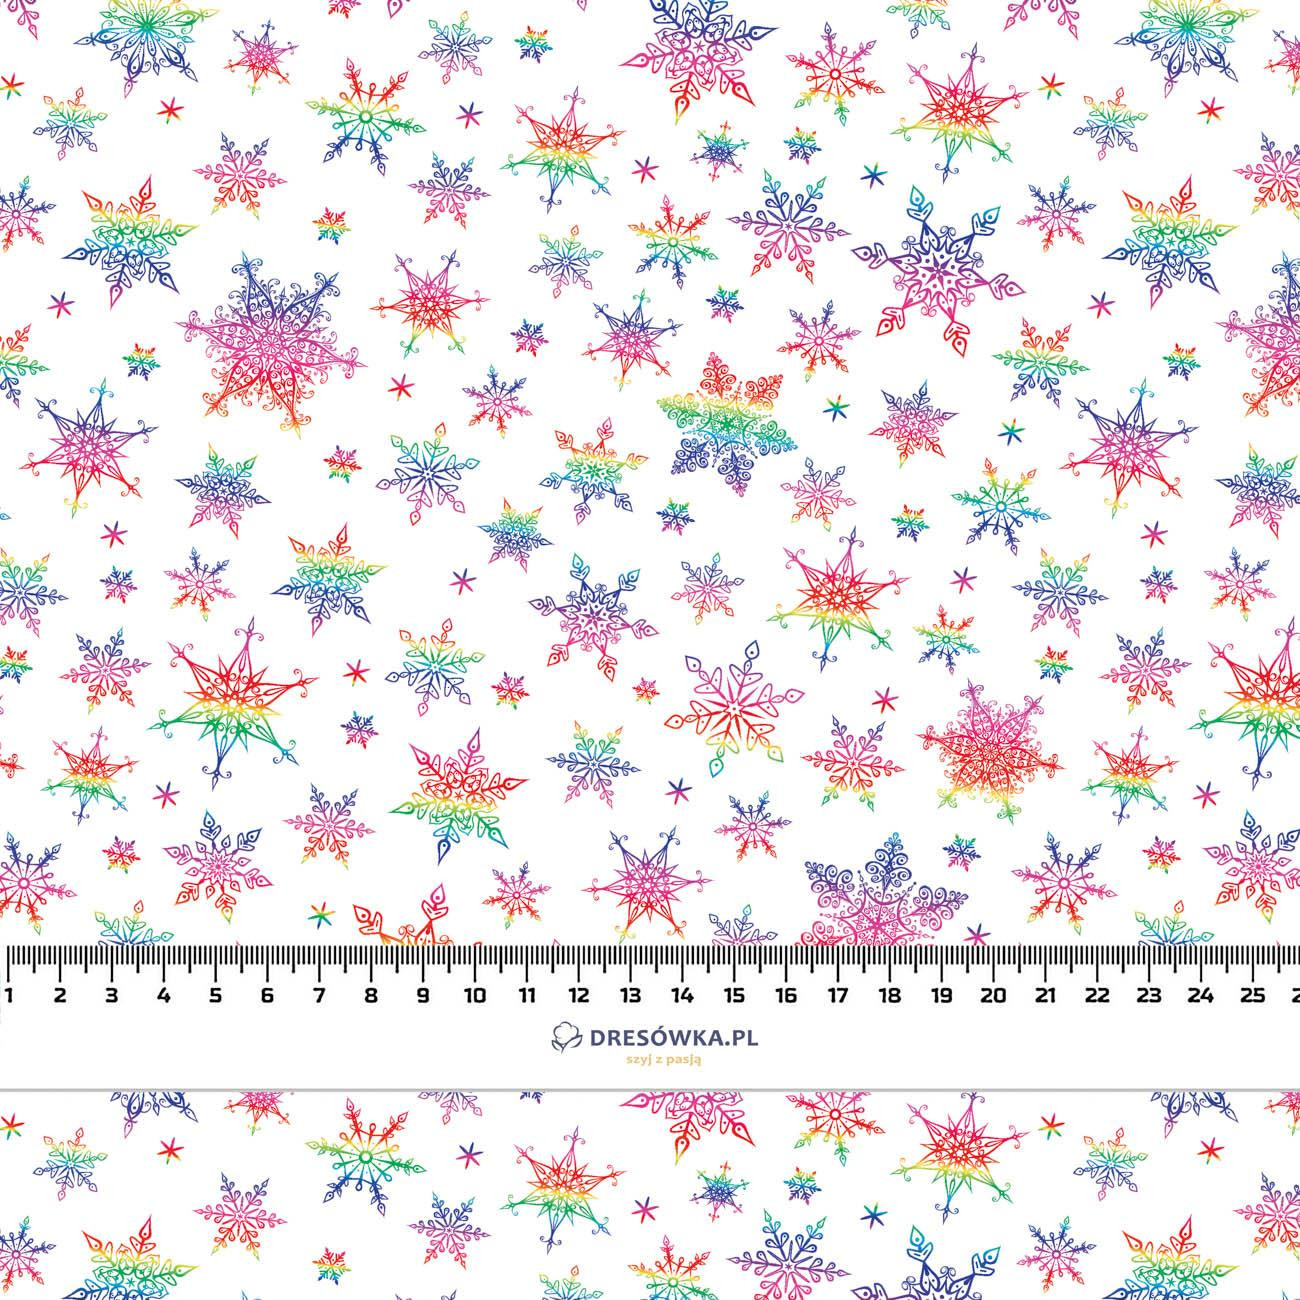 RAINBOW SNOWFLAKES PAT. 2 - brushed knit fabric with teddy / alpine fleece